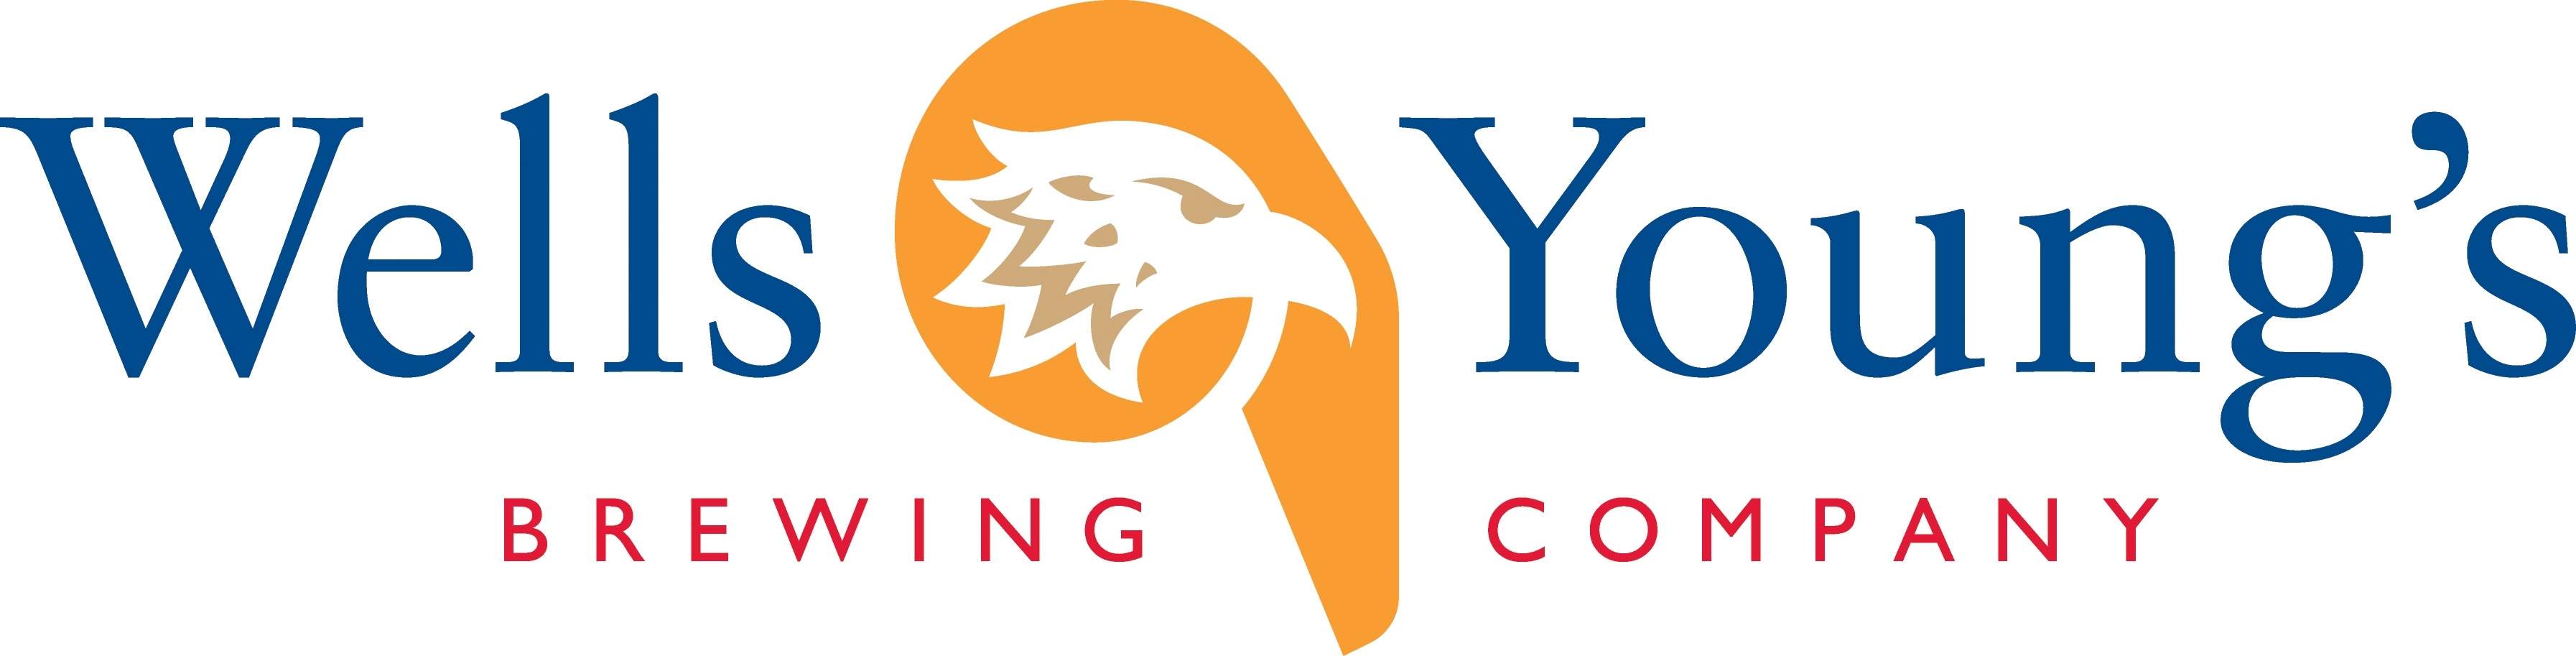 Wells & Young’s Brewing Company